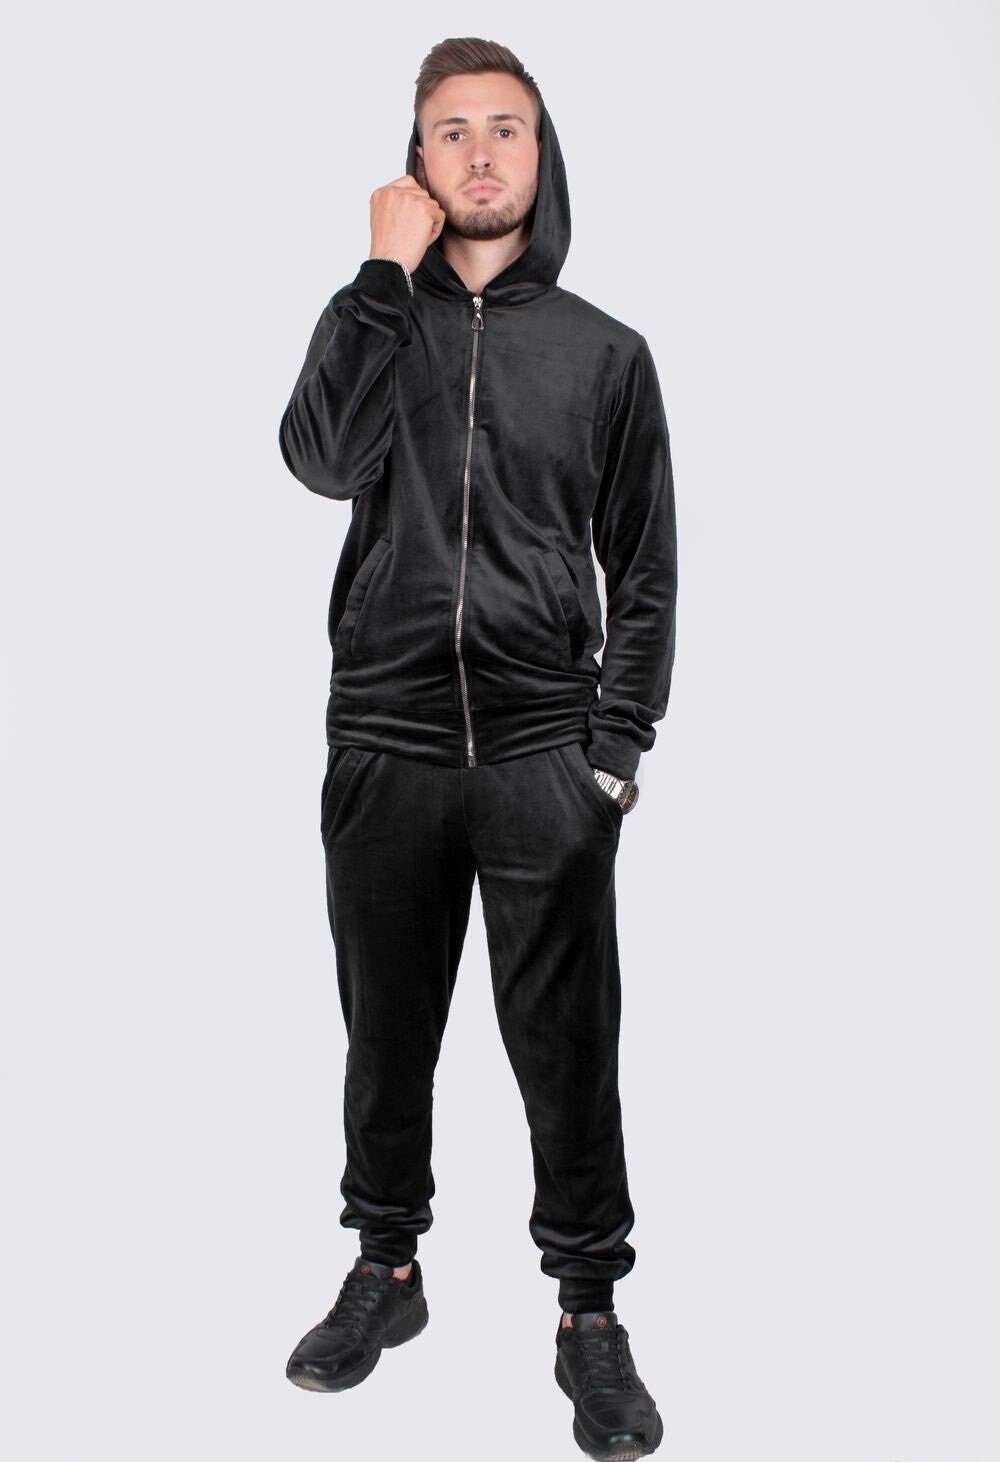 a-076etracksuit Hoodie Skinny Fit Velour Funnel Neck Tracksuit Fit Men -  China Velour Tracksuits and Tracksuits price